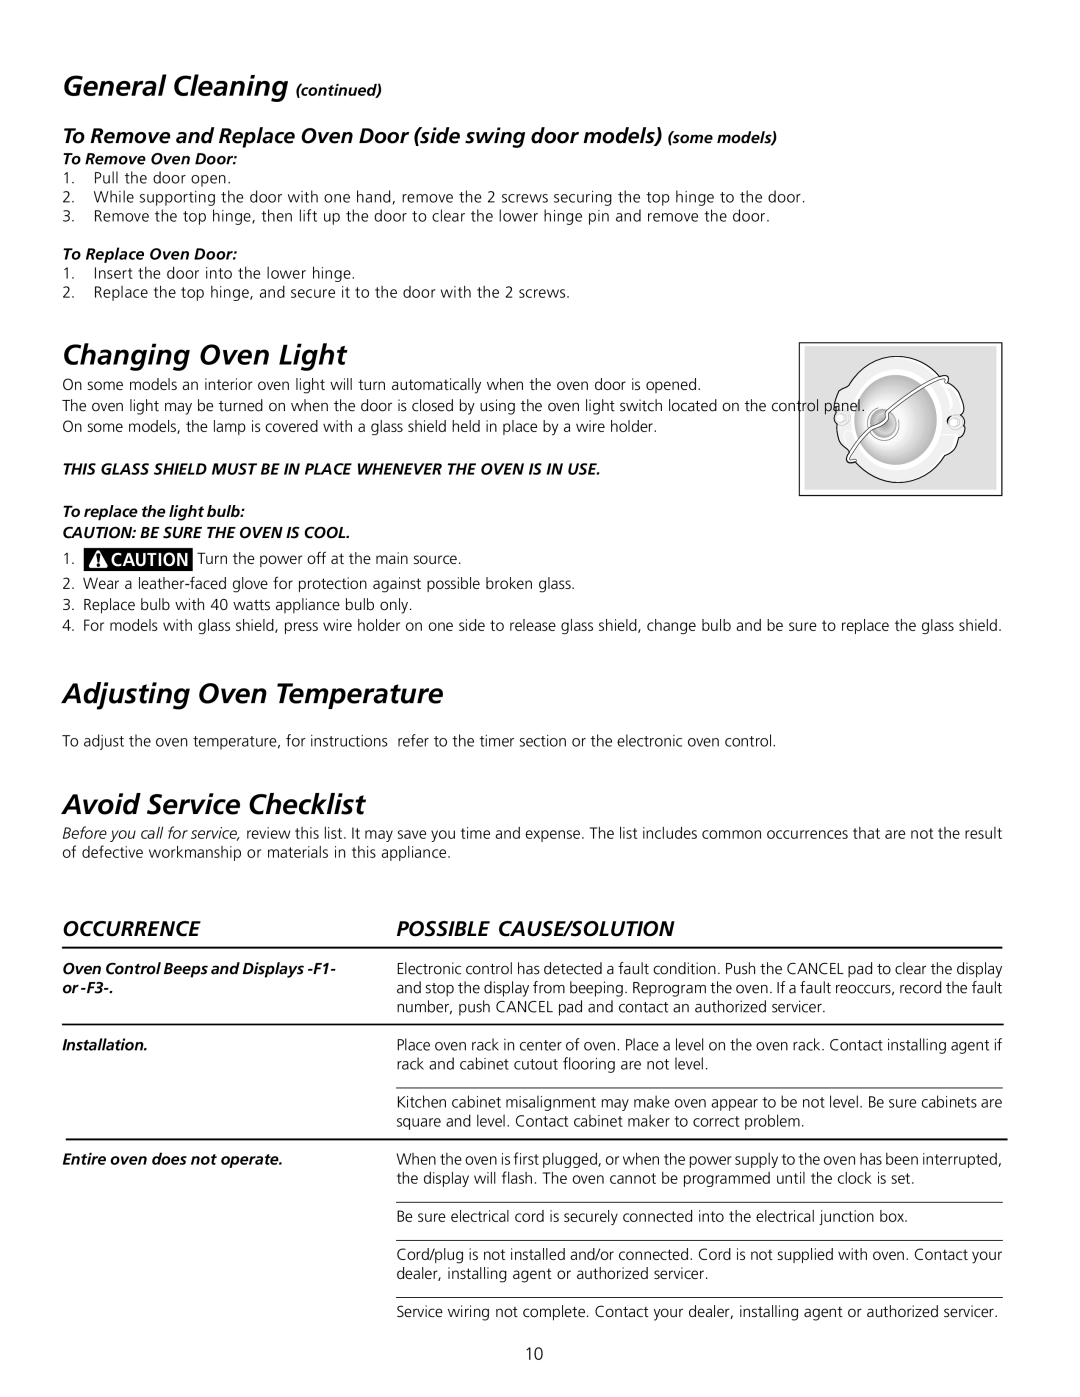 Frigidaire 318200912 General Cleaning continued, Changing Oven Light, Adjusting Oven Temperature, Avoid Service Checklist 